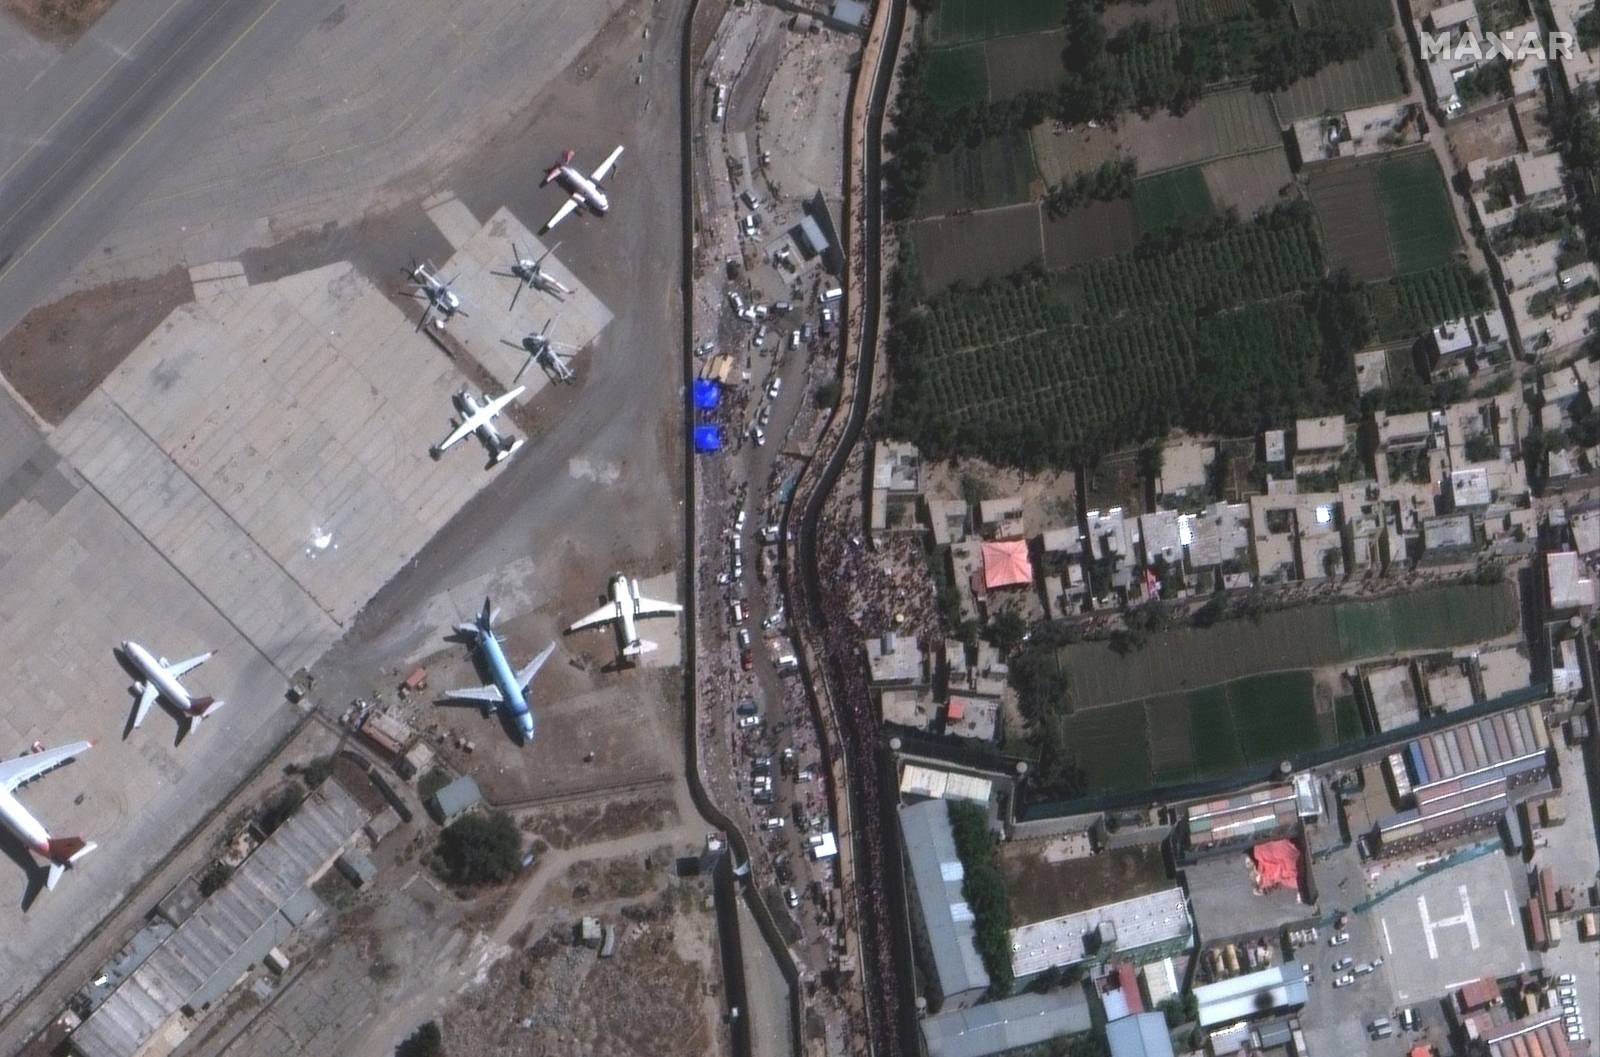 An overview of crowds at the Abbey Gate at Kabul's Hamid Karzai International Airport